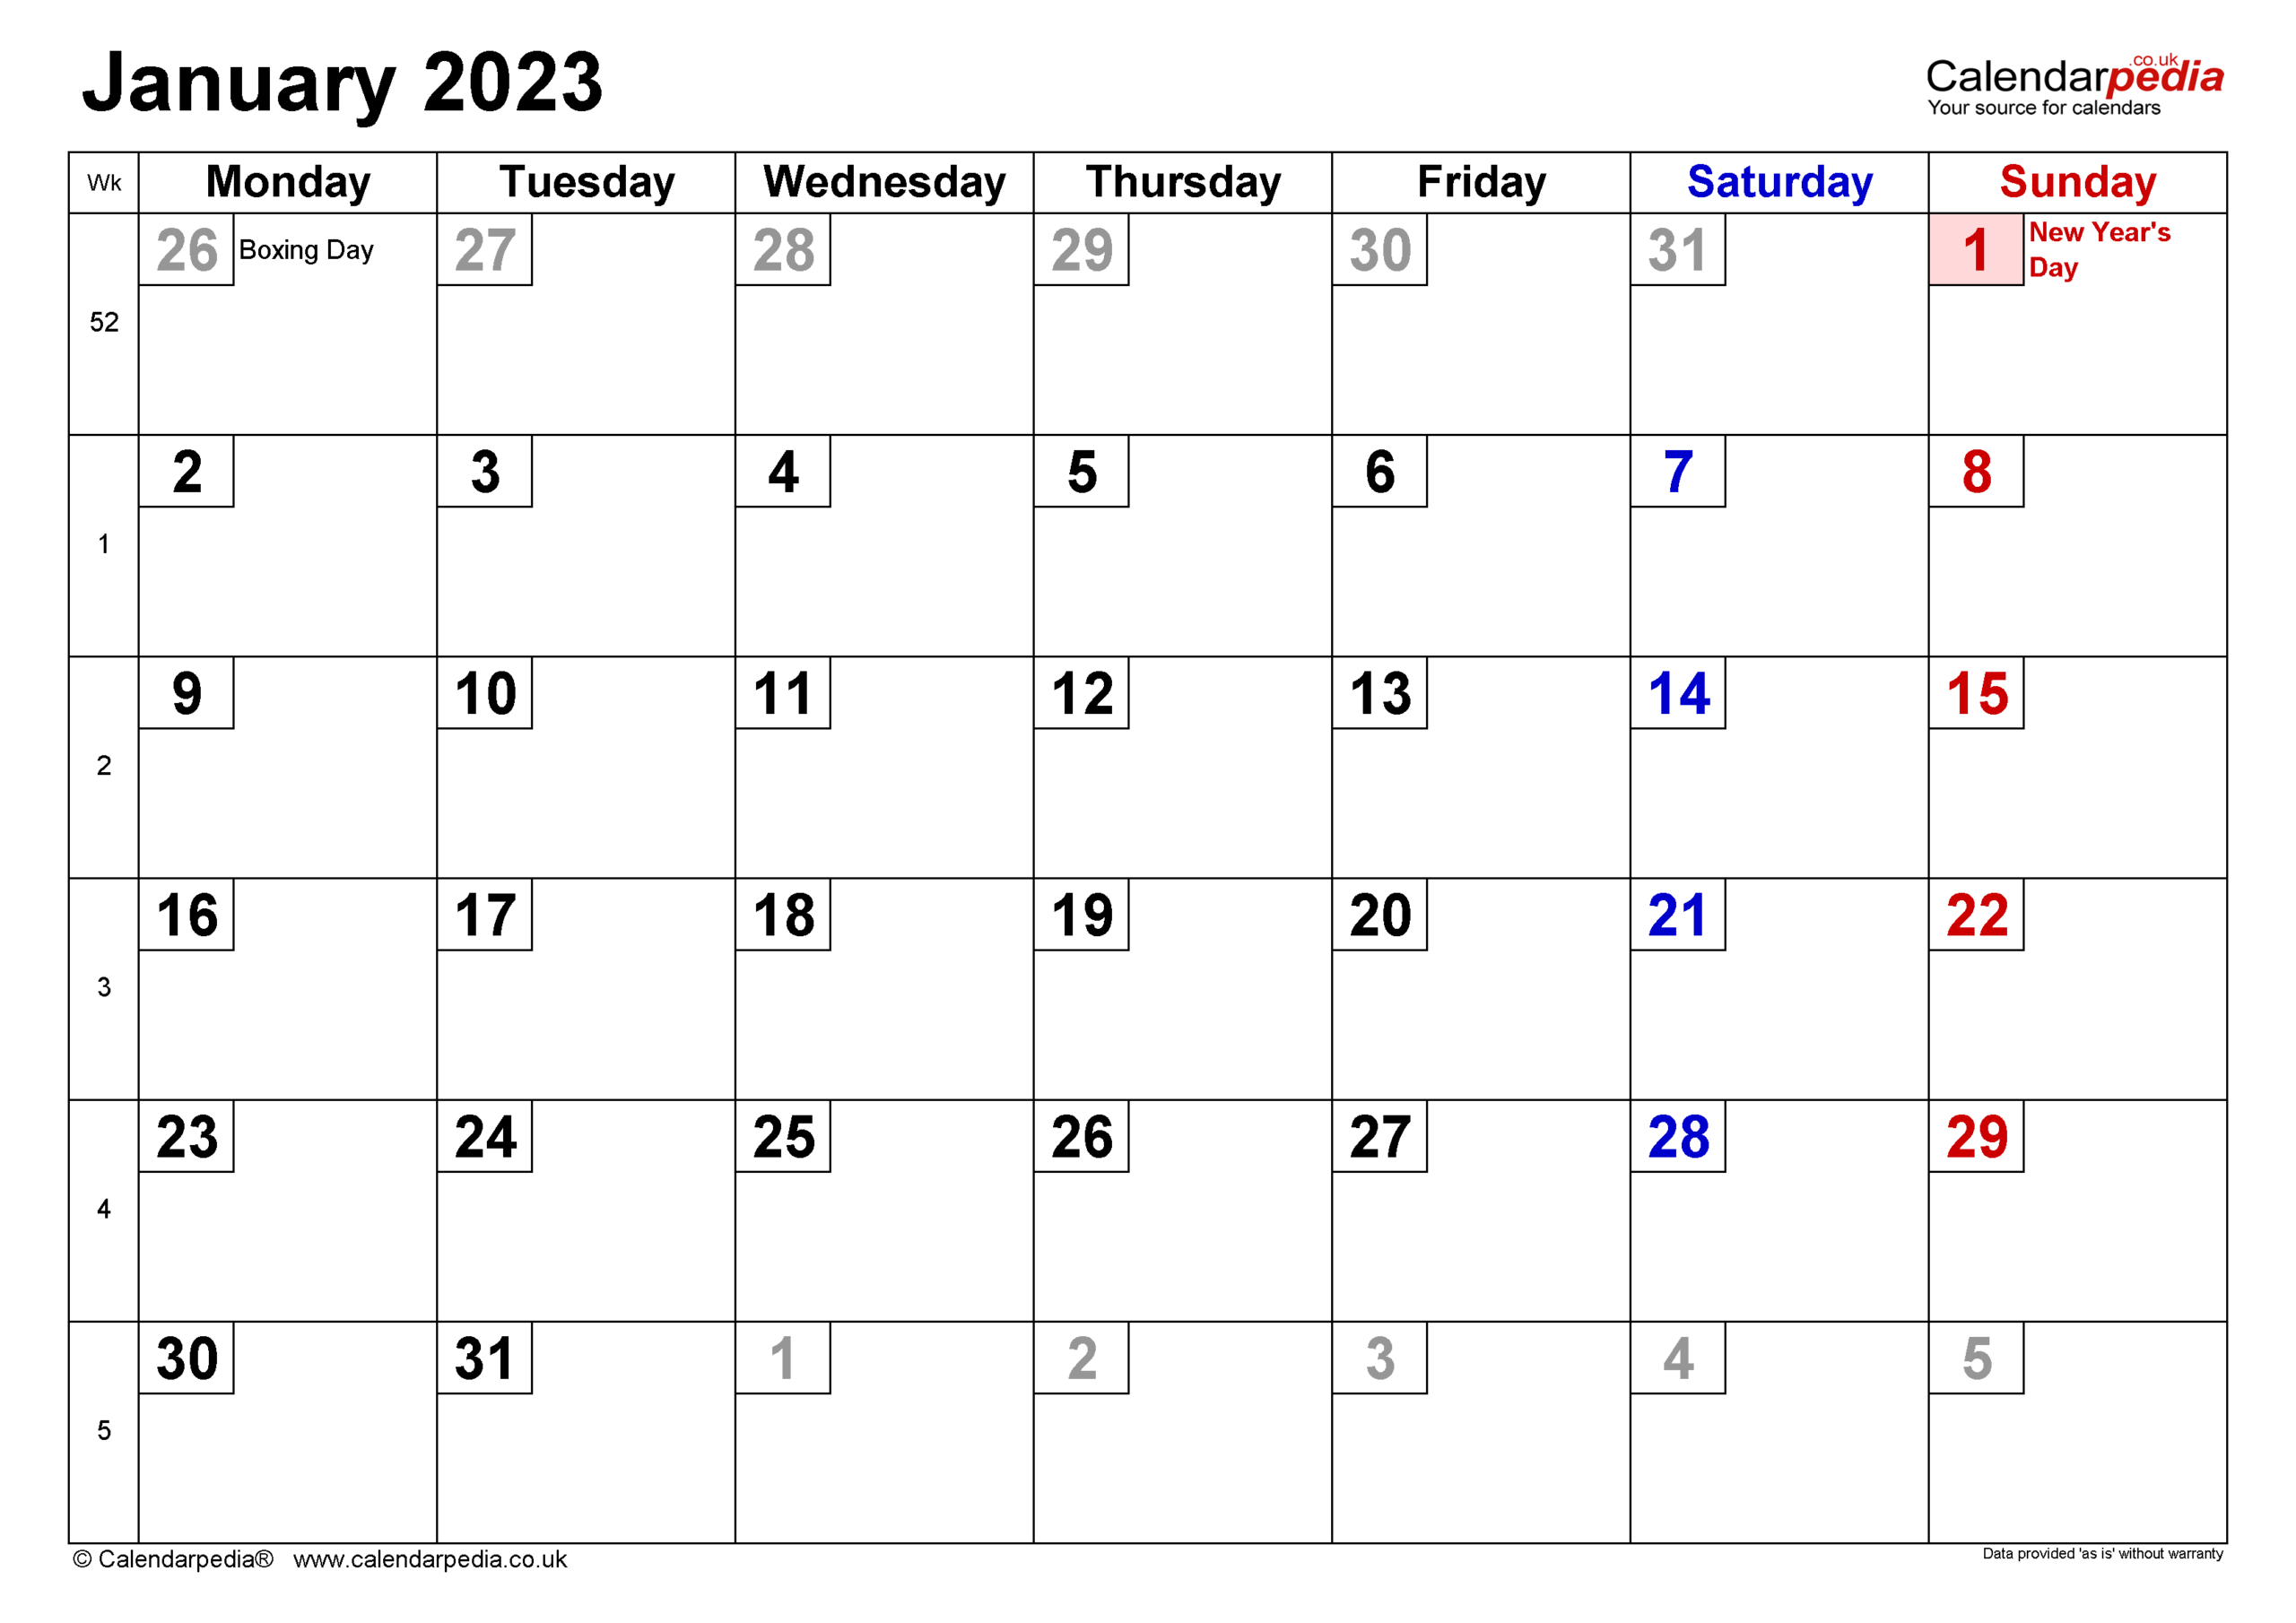 Take How Many Months To January 2023